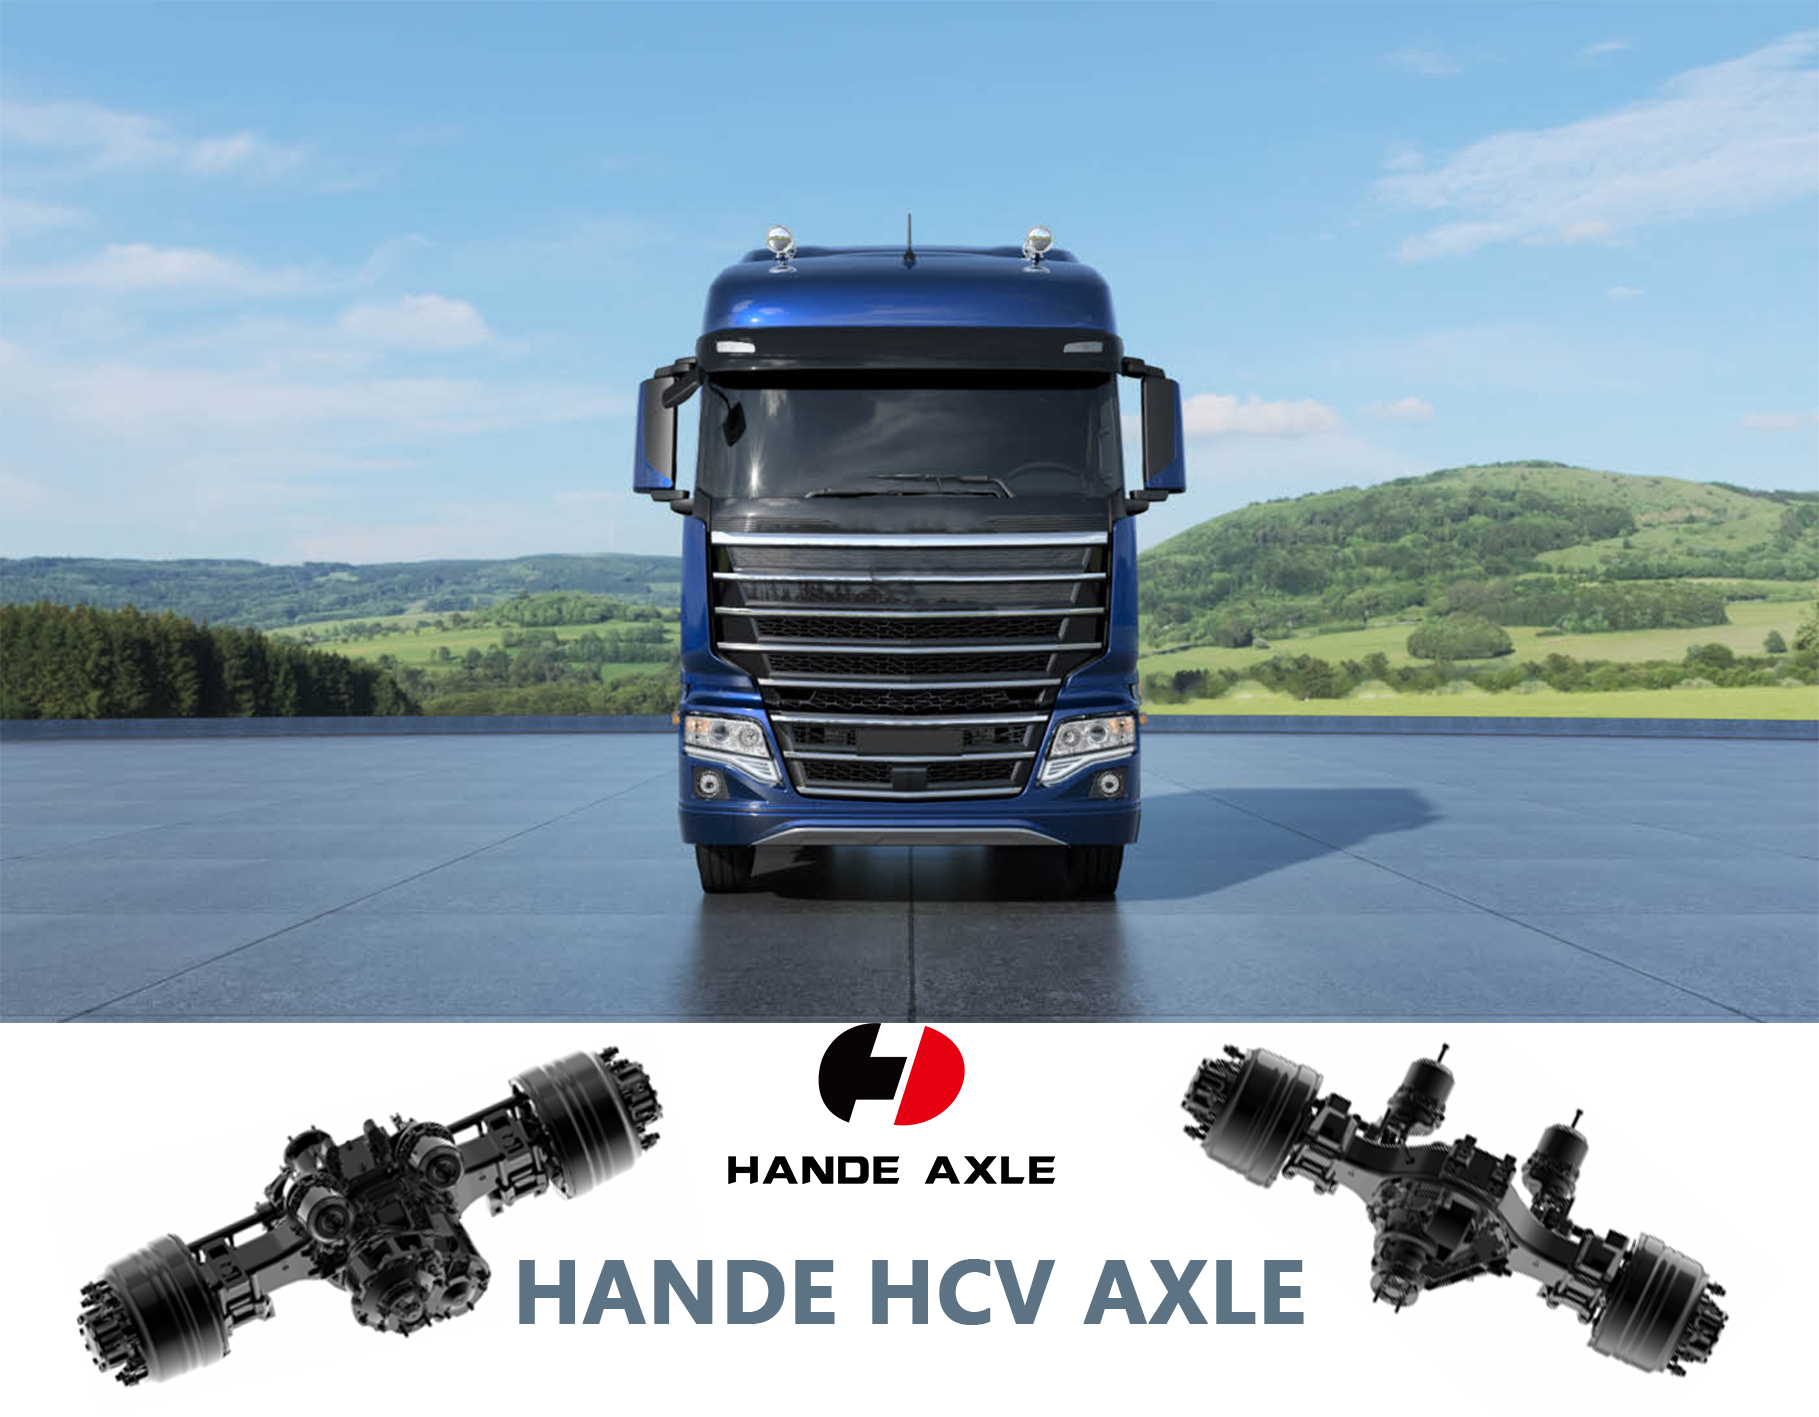 HanDe HCV Truck Axle-A Reliable Partner for Your Cargo